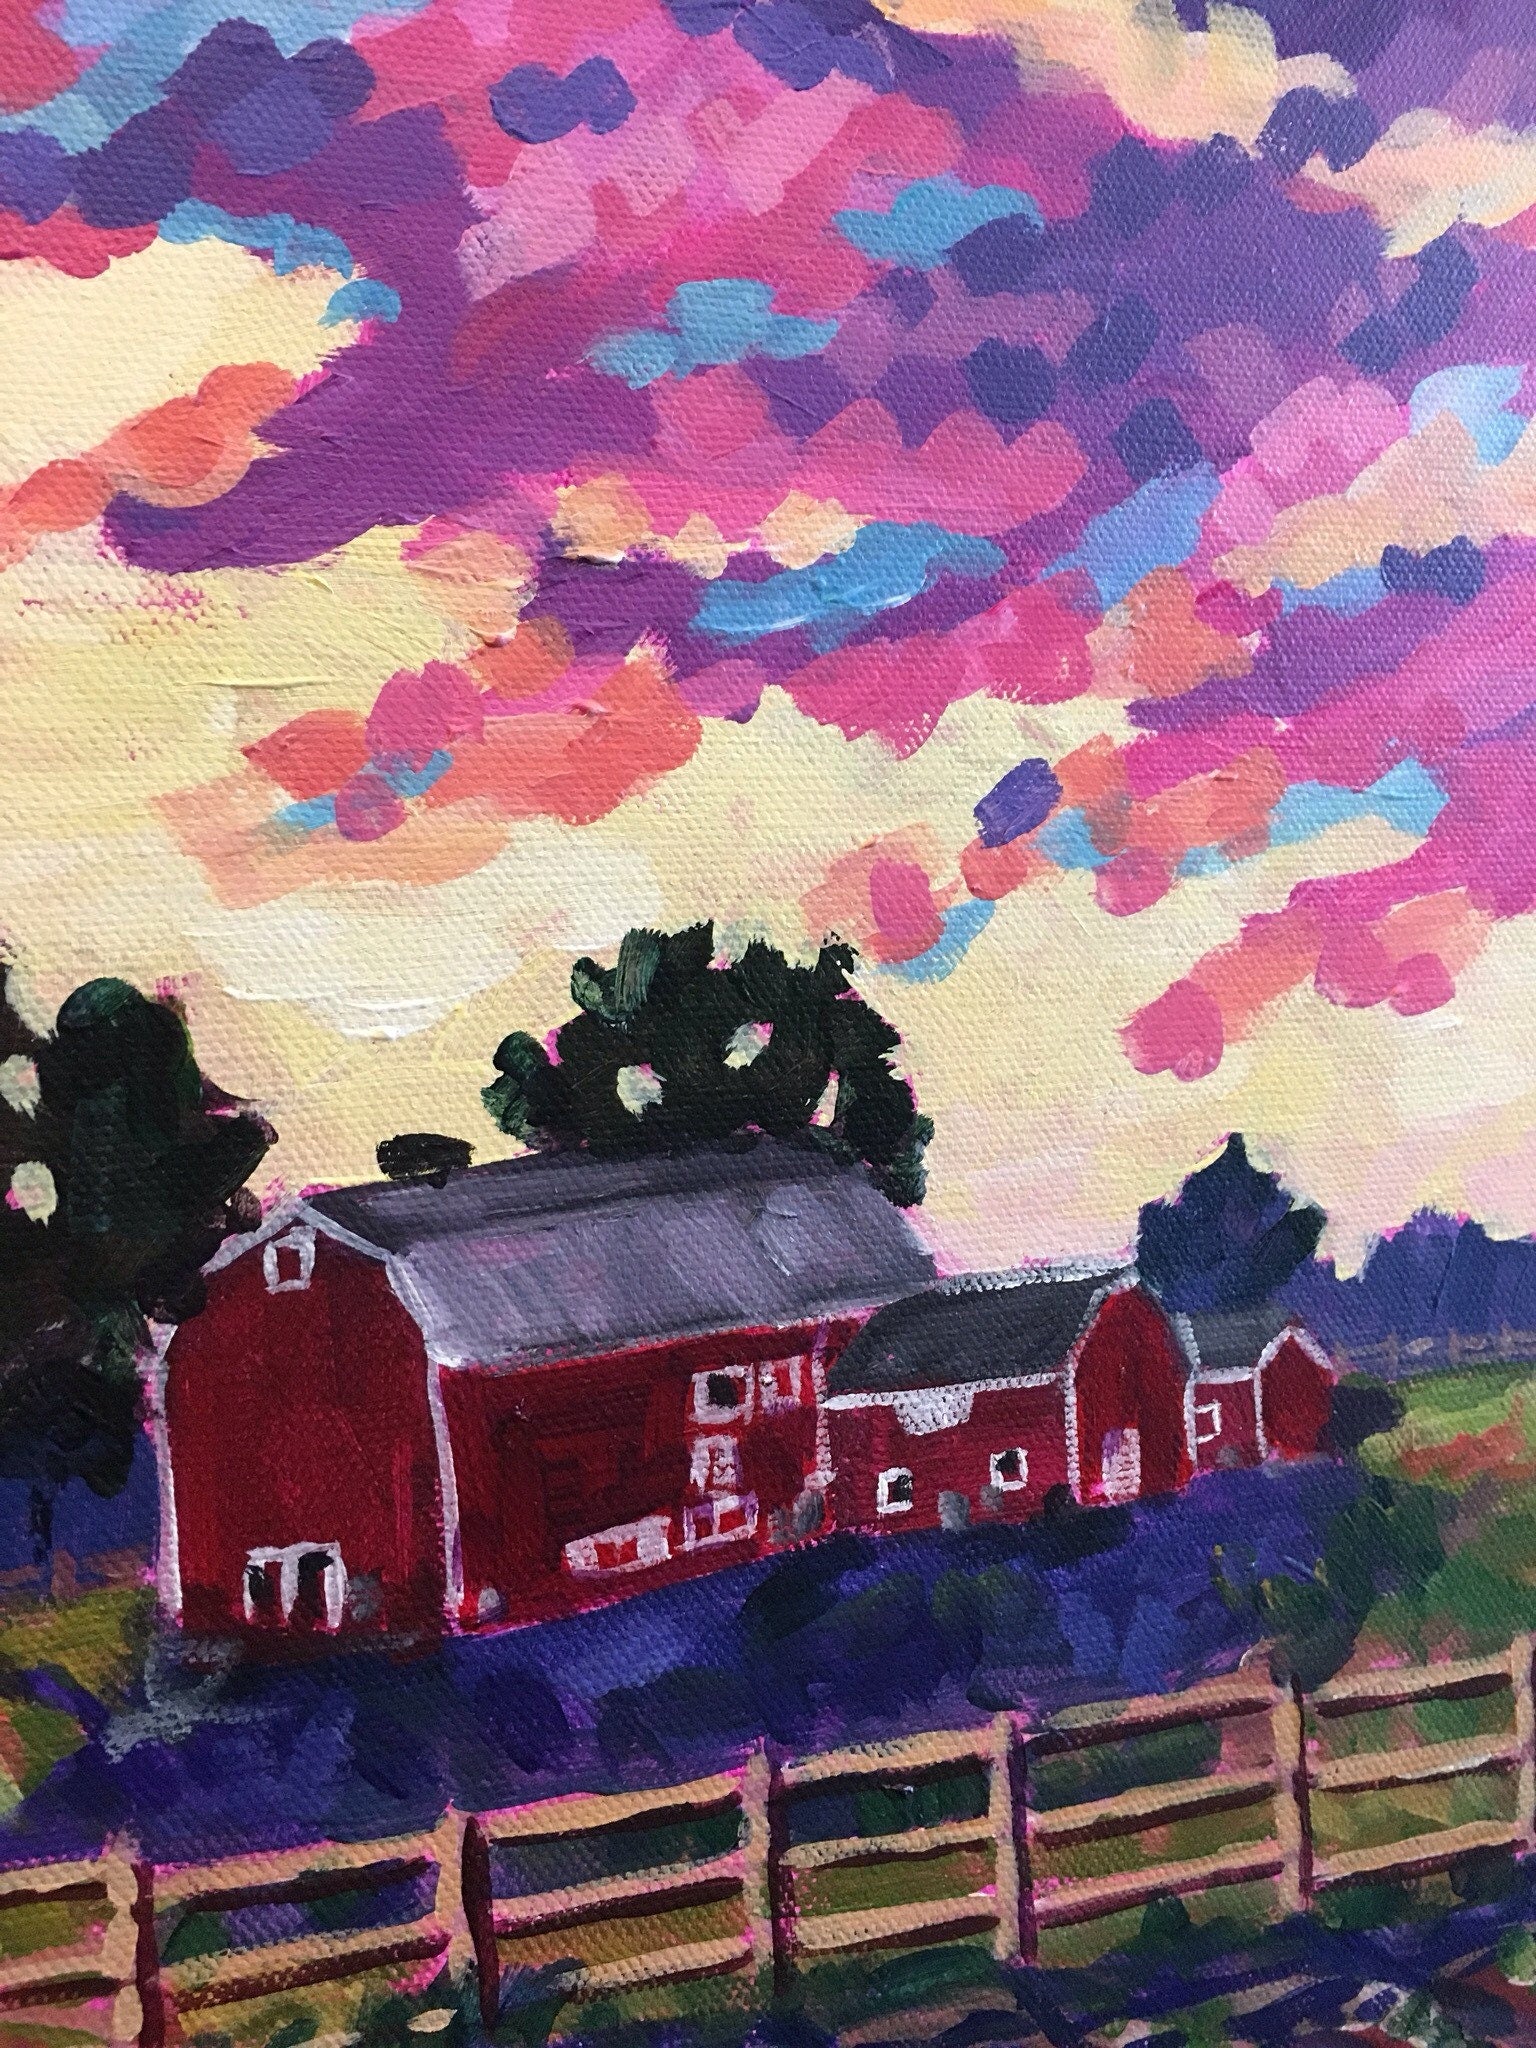 another detail with the barns